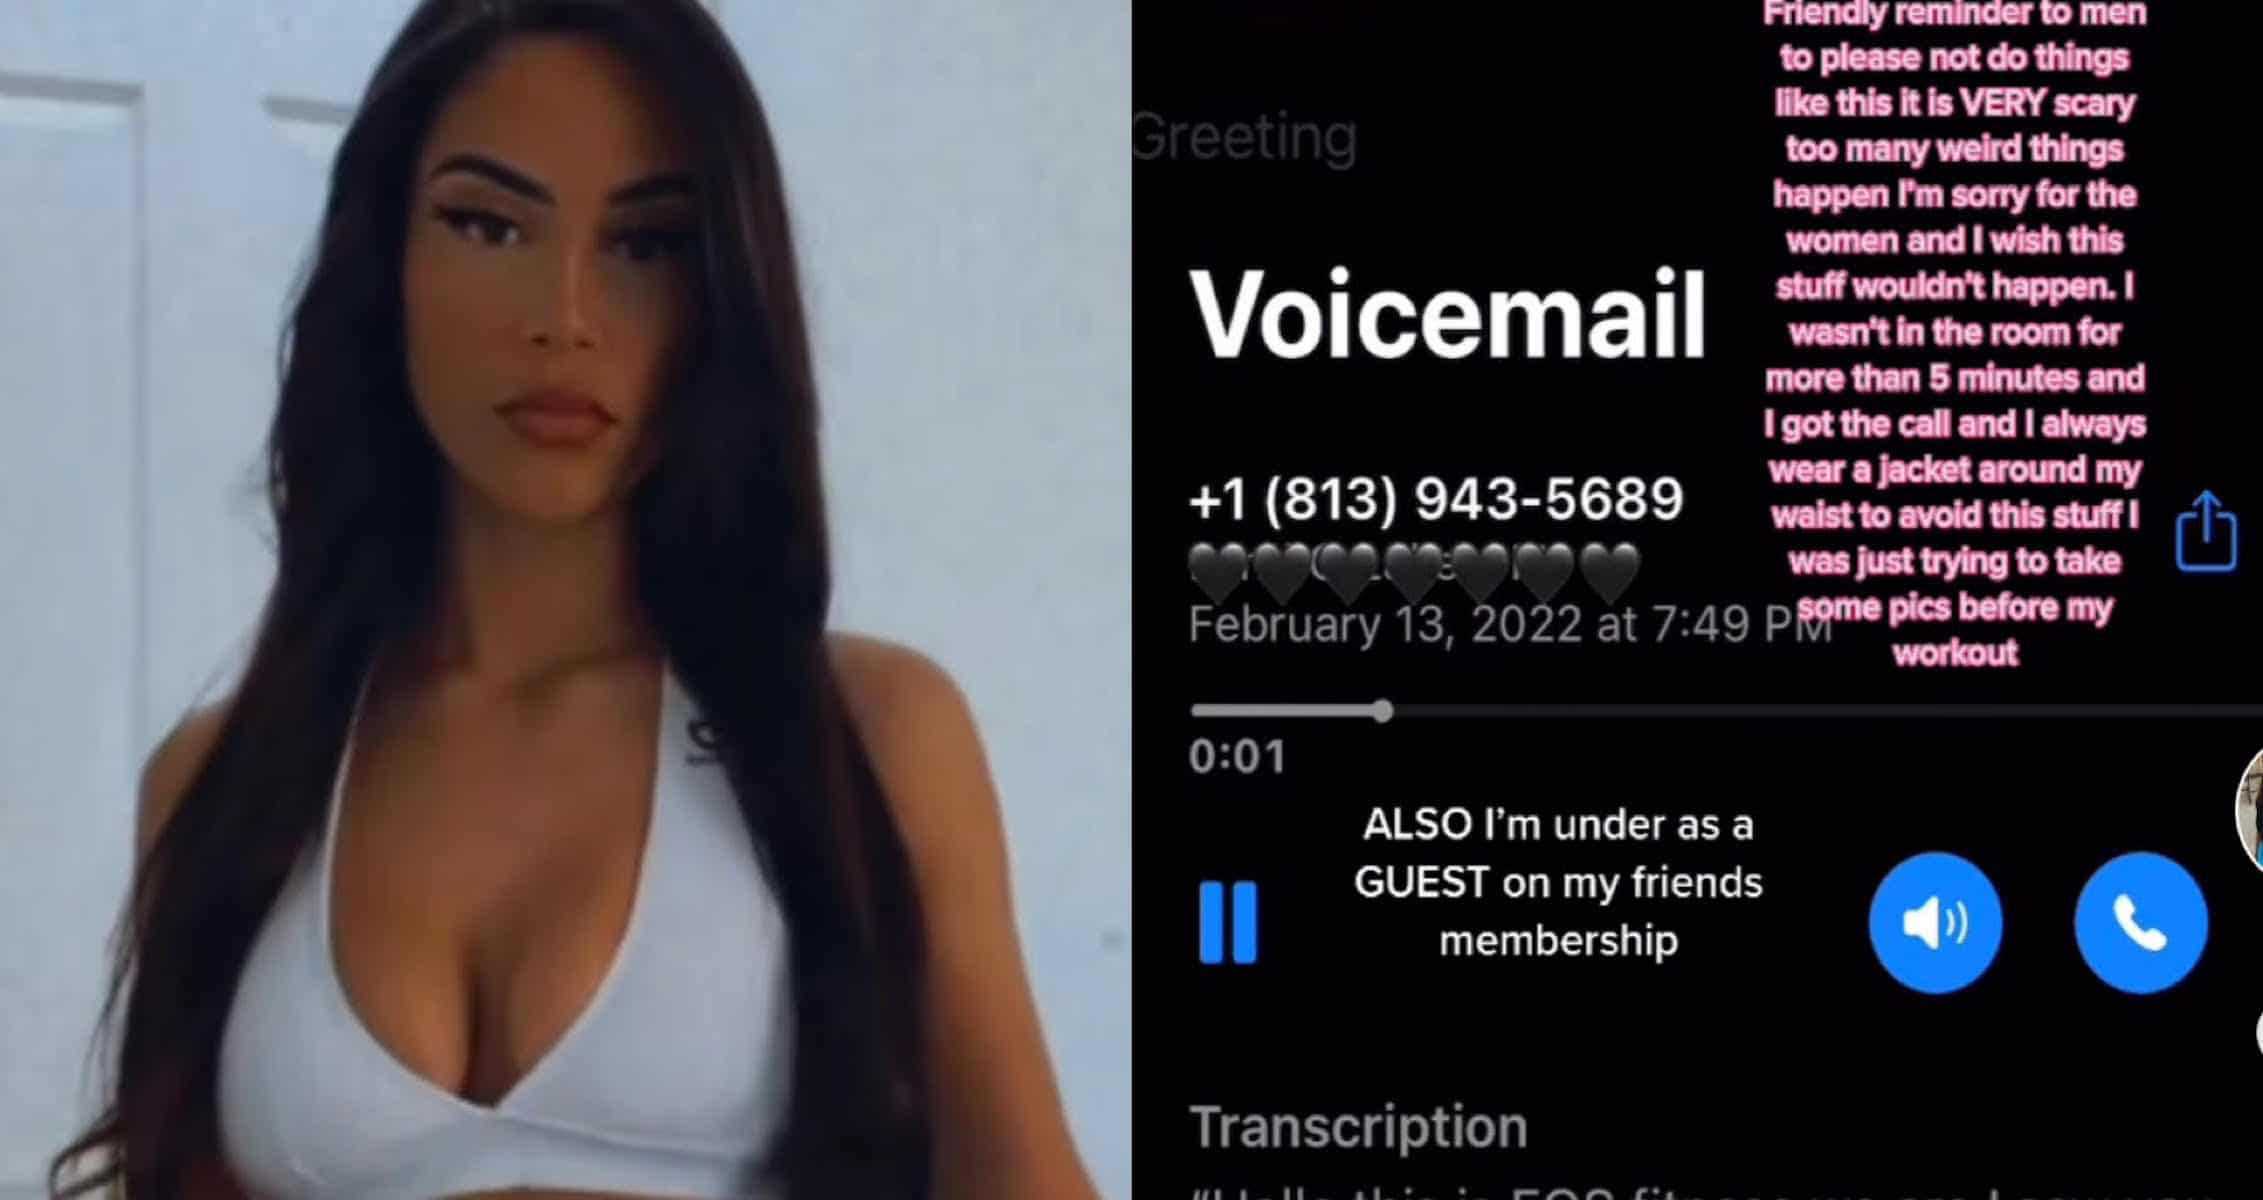 TikTok Fitness Influencer Shares Strange Voicemail Left By Gym Employee